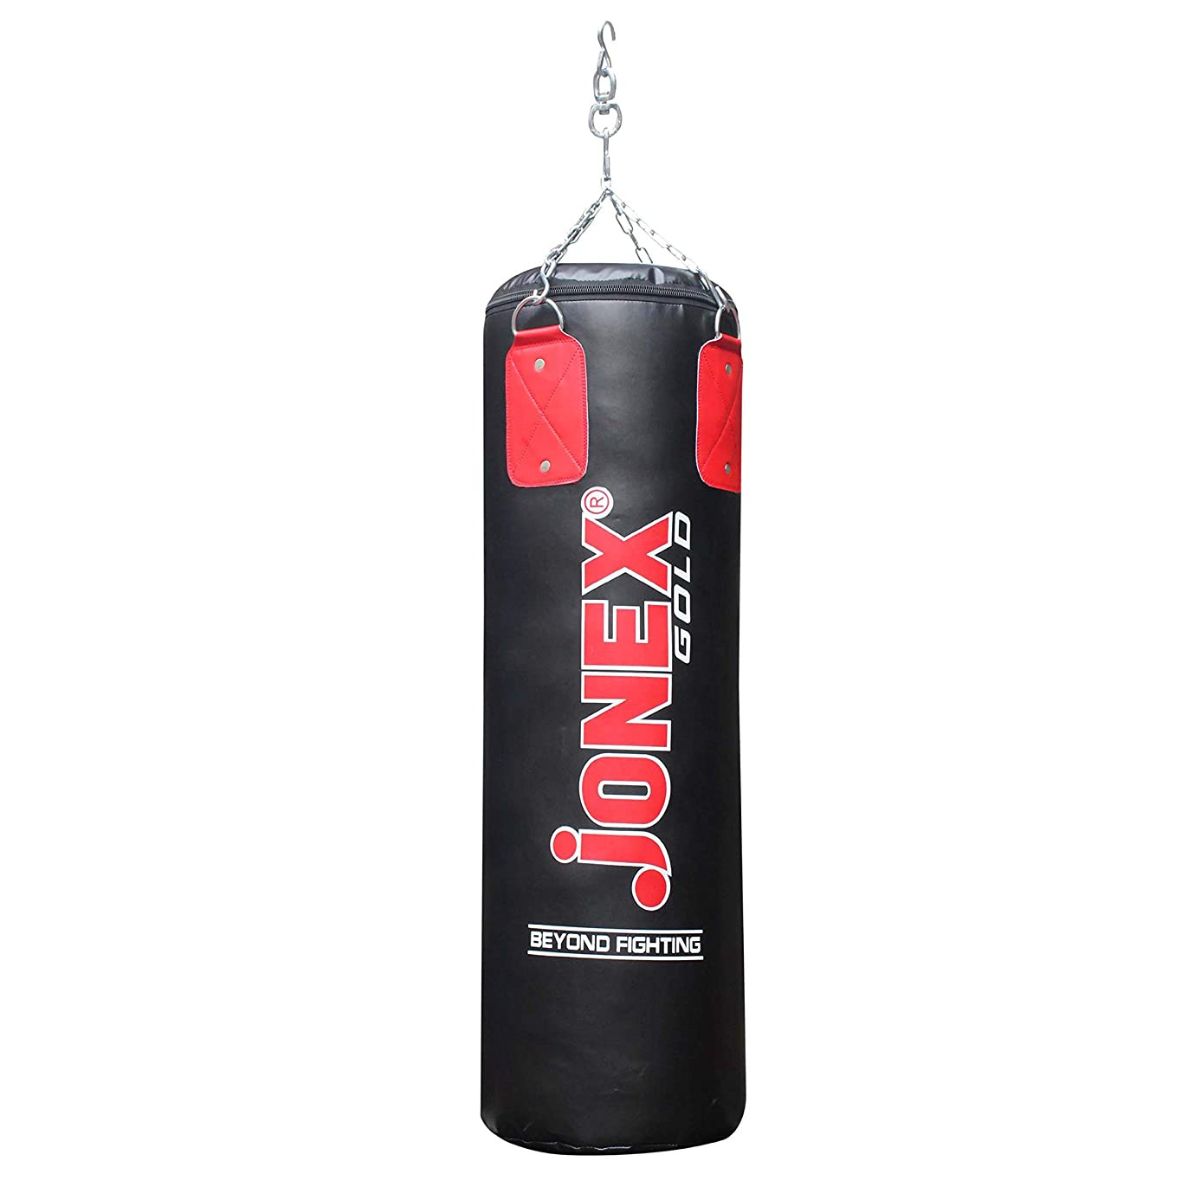 Jonex Punching Bag Unfilled Boxing Kit with Hanging Chain